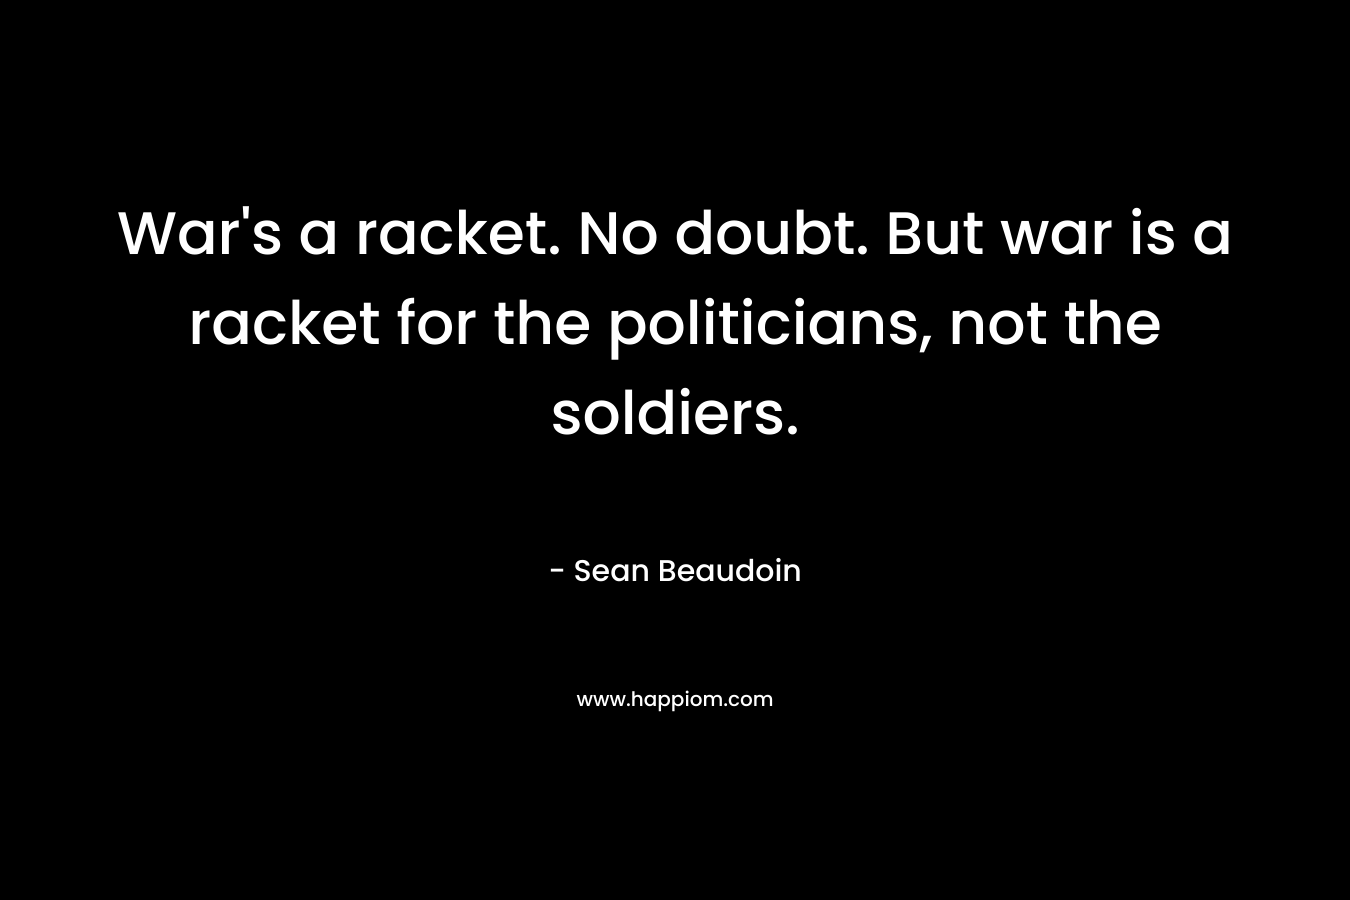 War’s a racket. No doubt. But war is a racket for the politicians, not the soldiers. – Sean Beaudoin